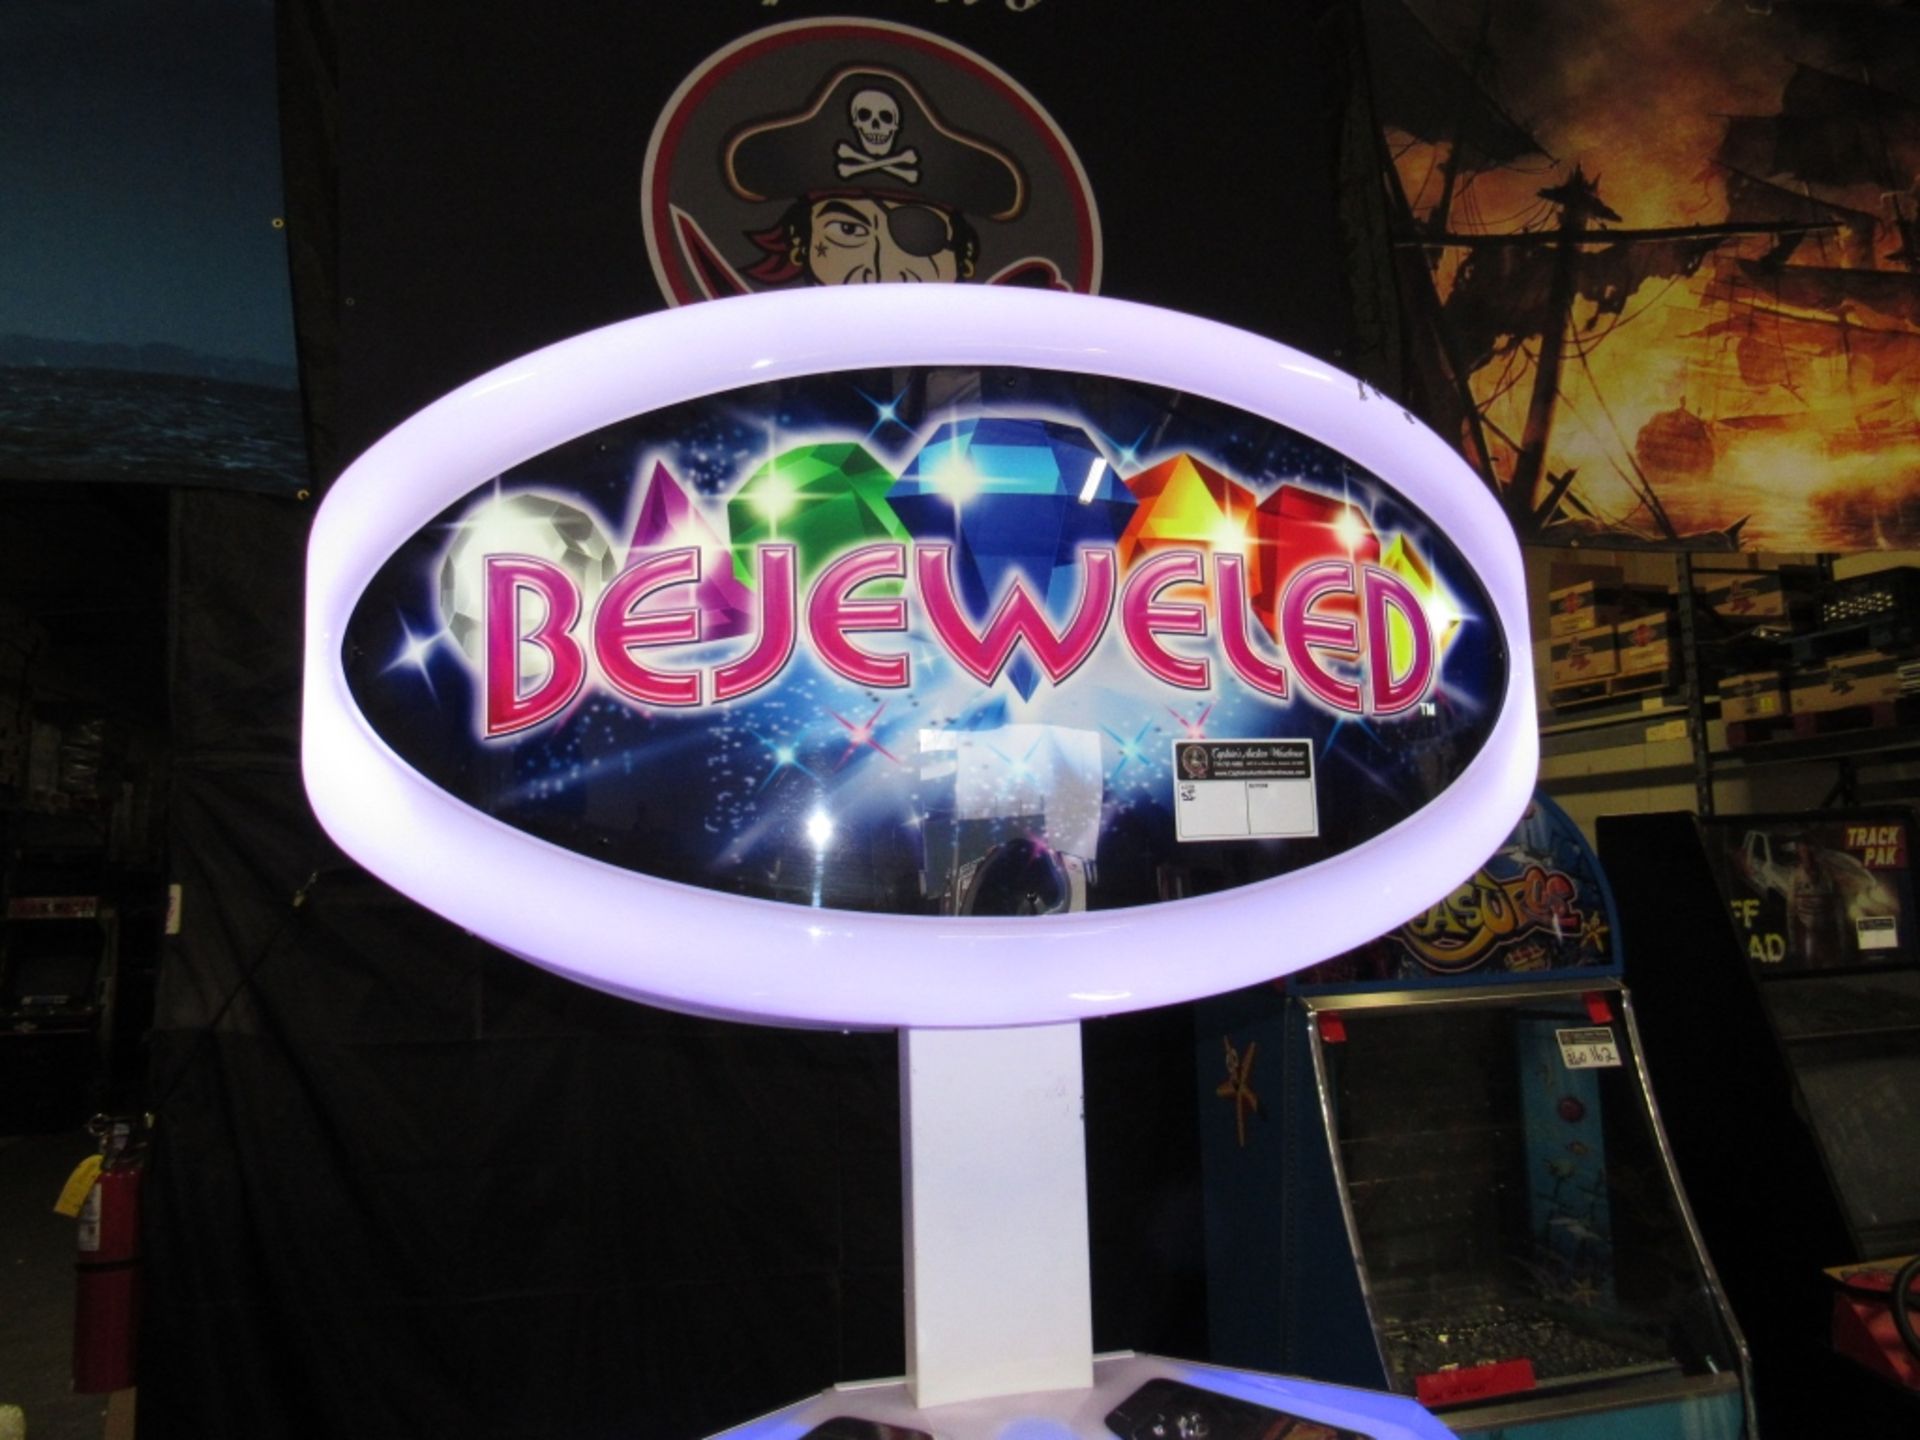 BEJEWELED UPRIGHT DELUXE ARCADE GAME - Image 6 of 10